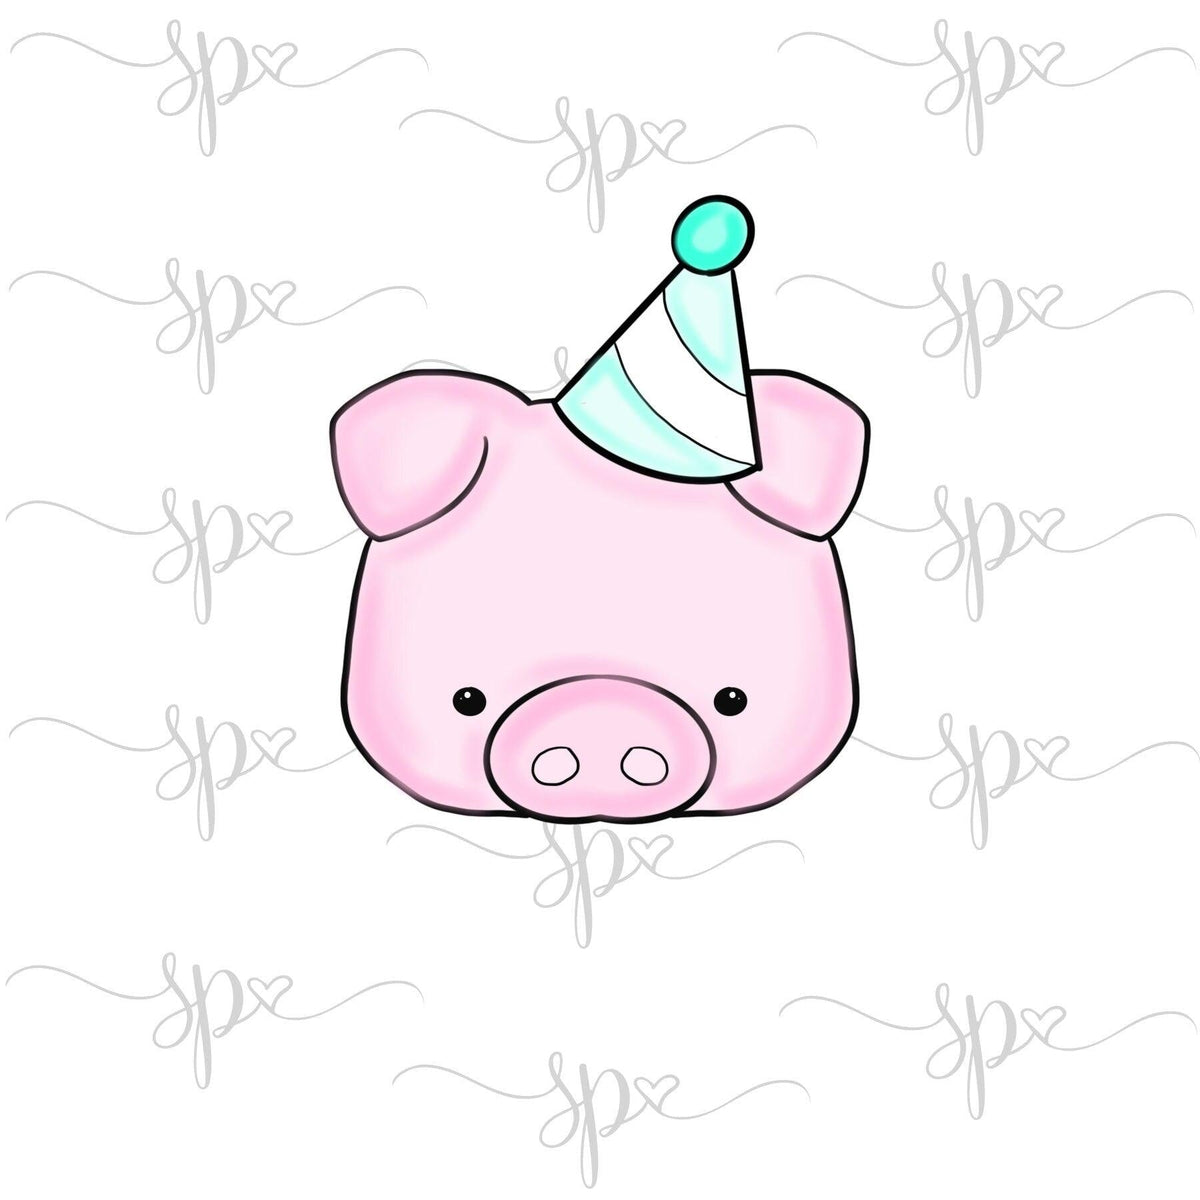 Party Pig Face Cookie Cutter - Sweetleigh 